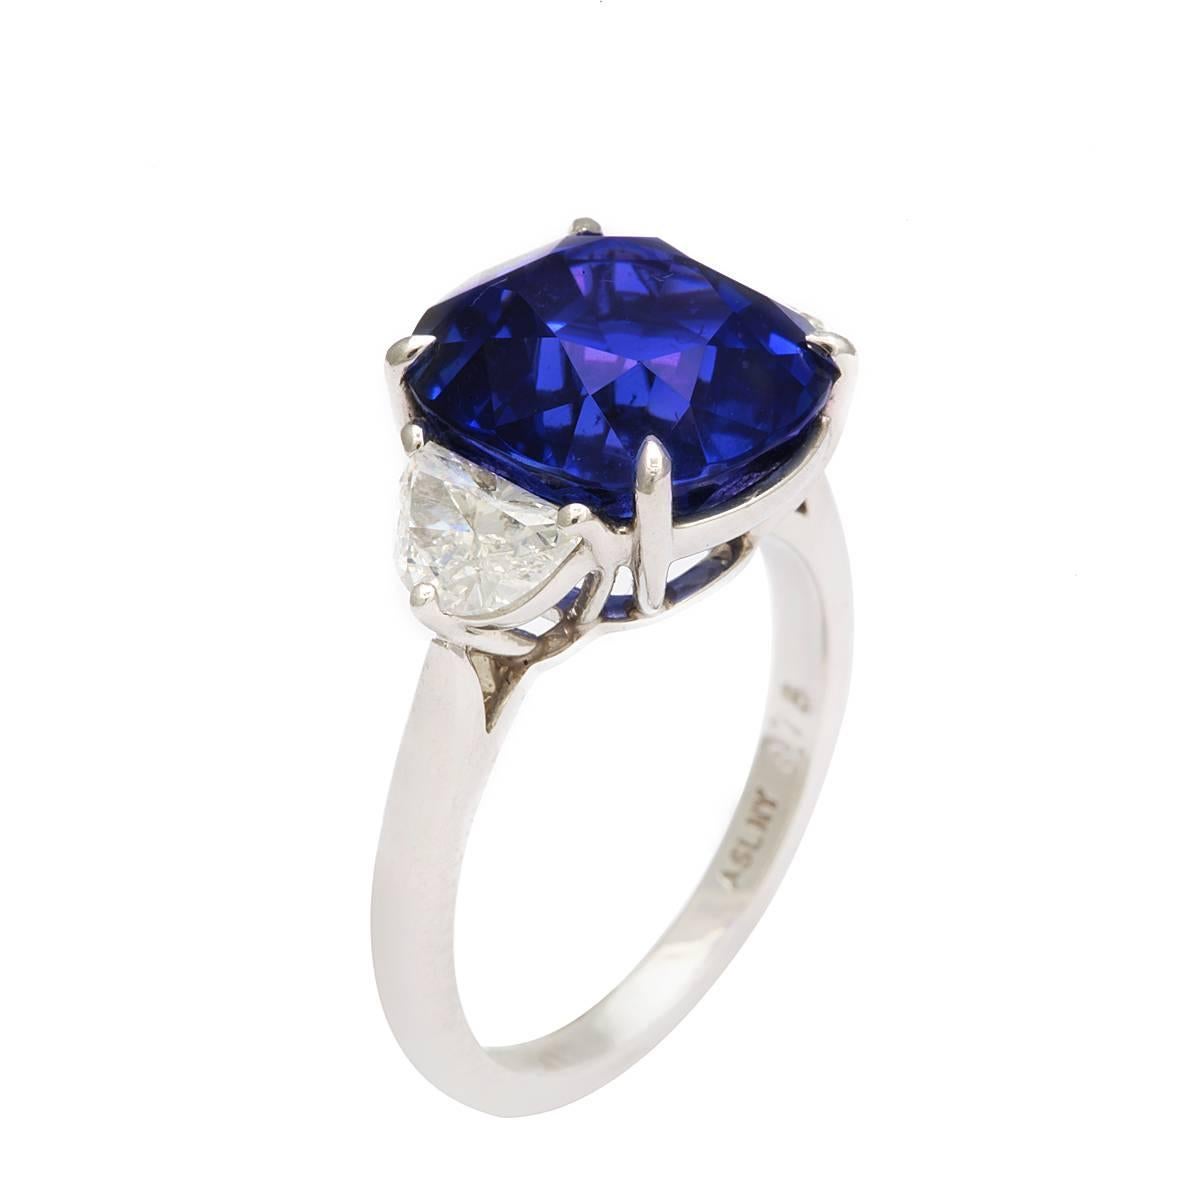 Natural 8.75 carat Ceylon sapphire ring set in platinum with lunette diamond shoulders (approx. 1.5 cts). English, ca. 1950 

